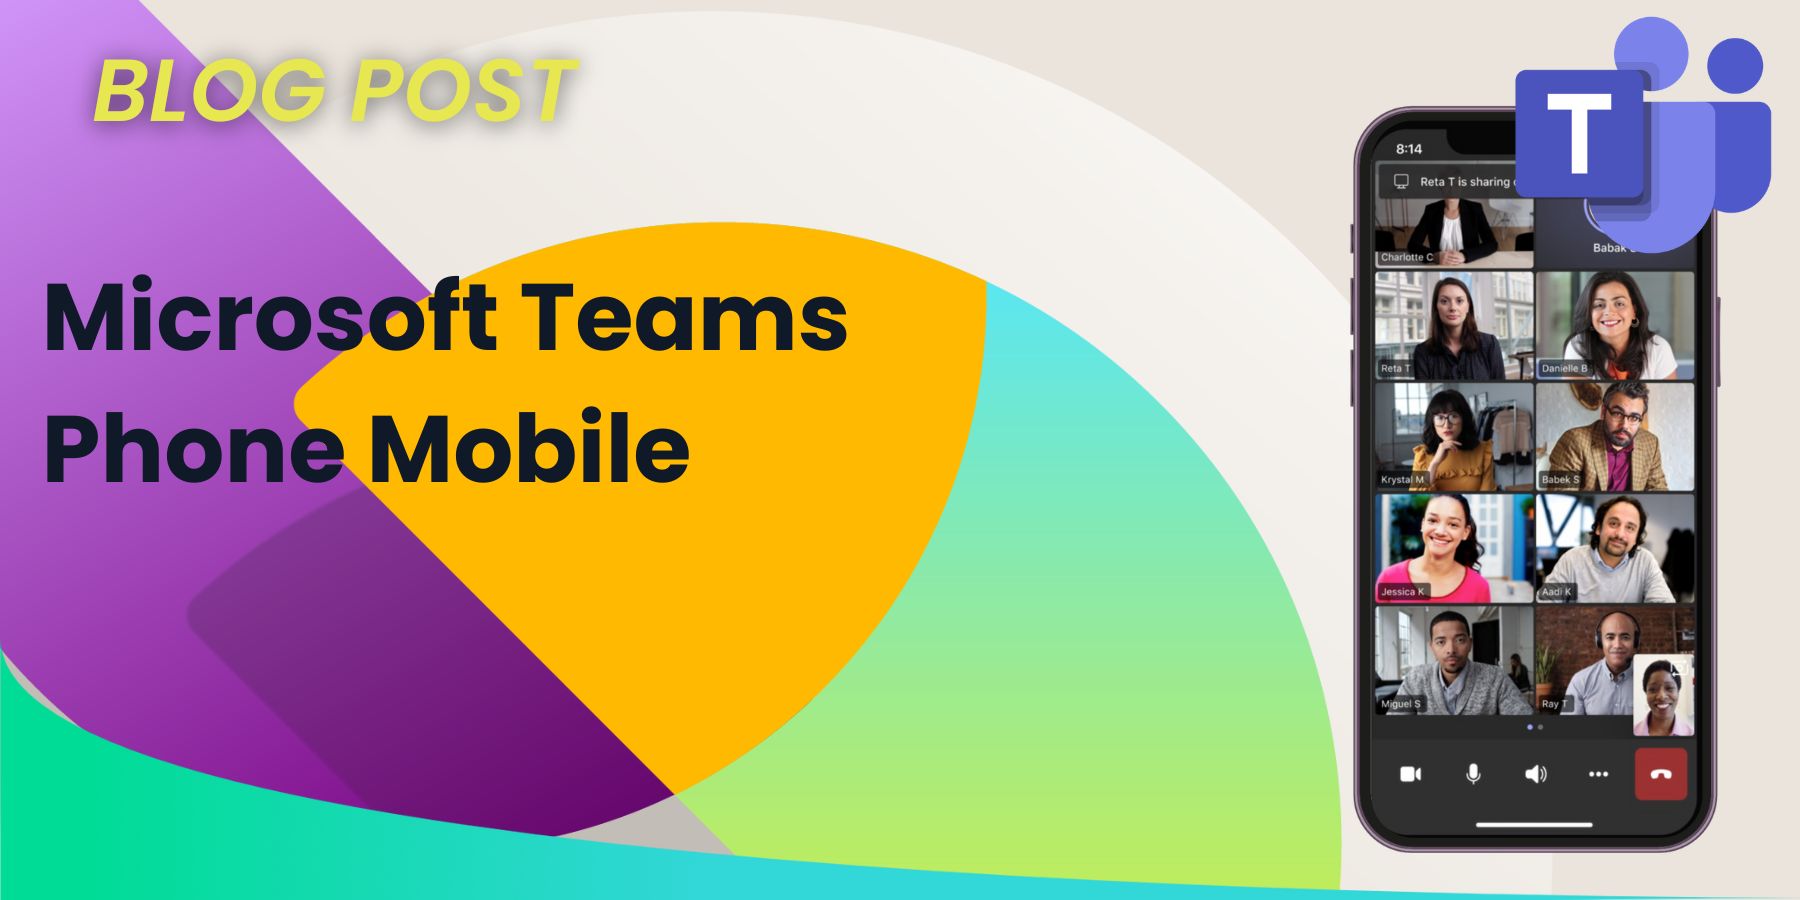 Featured image for “Microsoft Teams Phone Mobile”